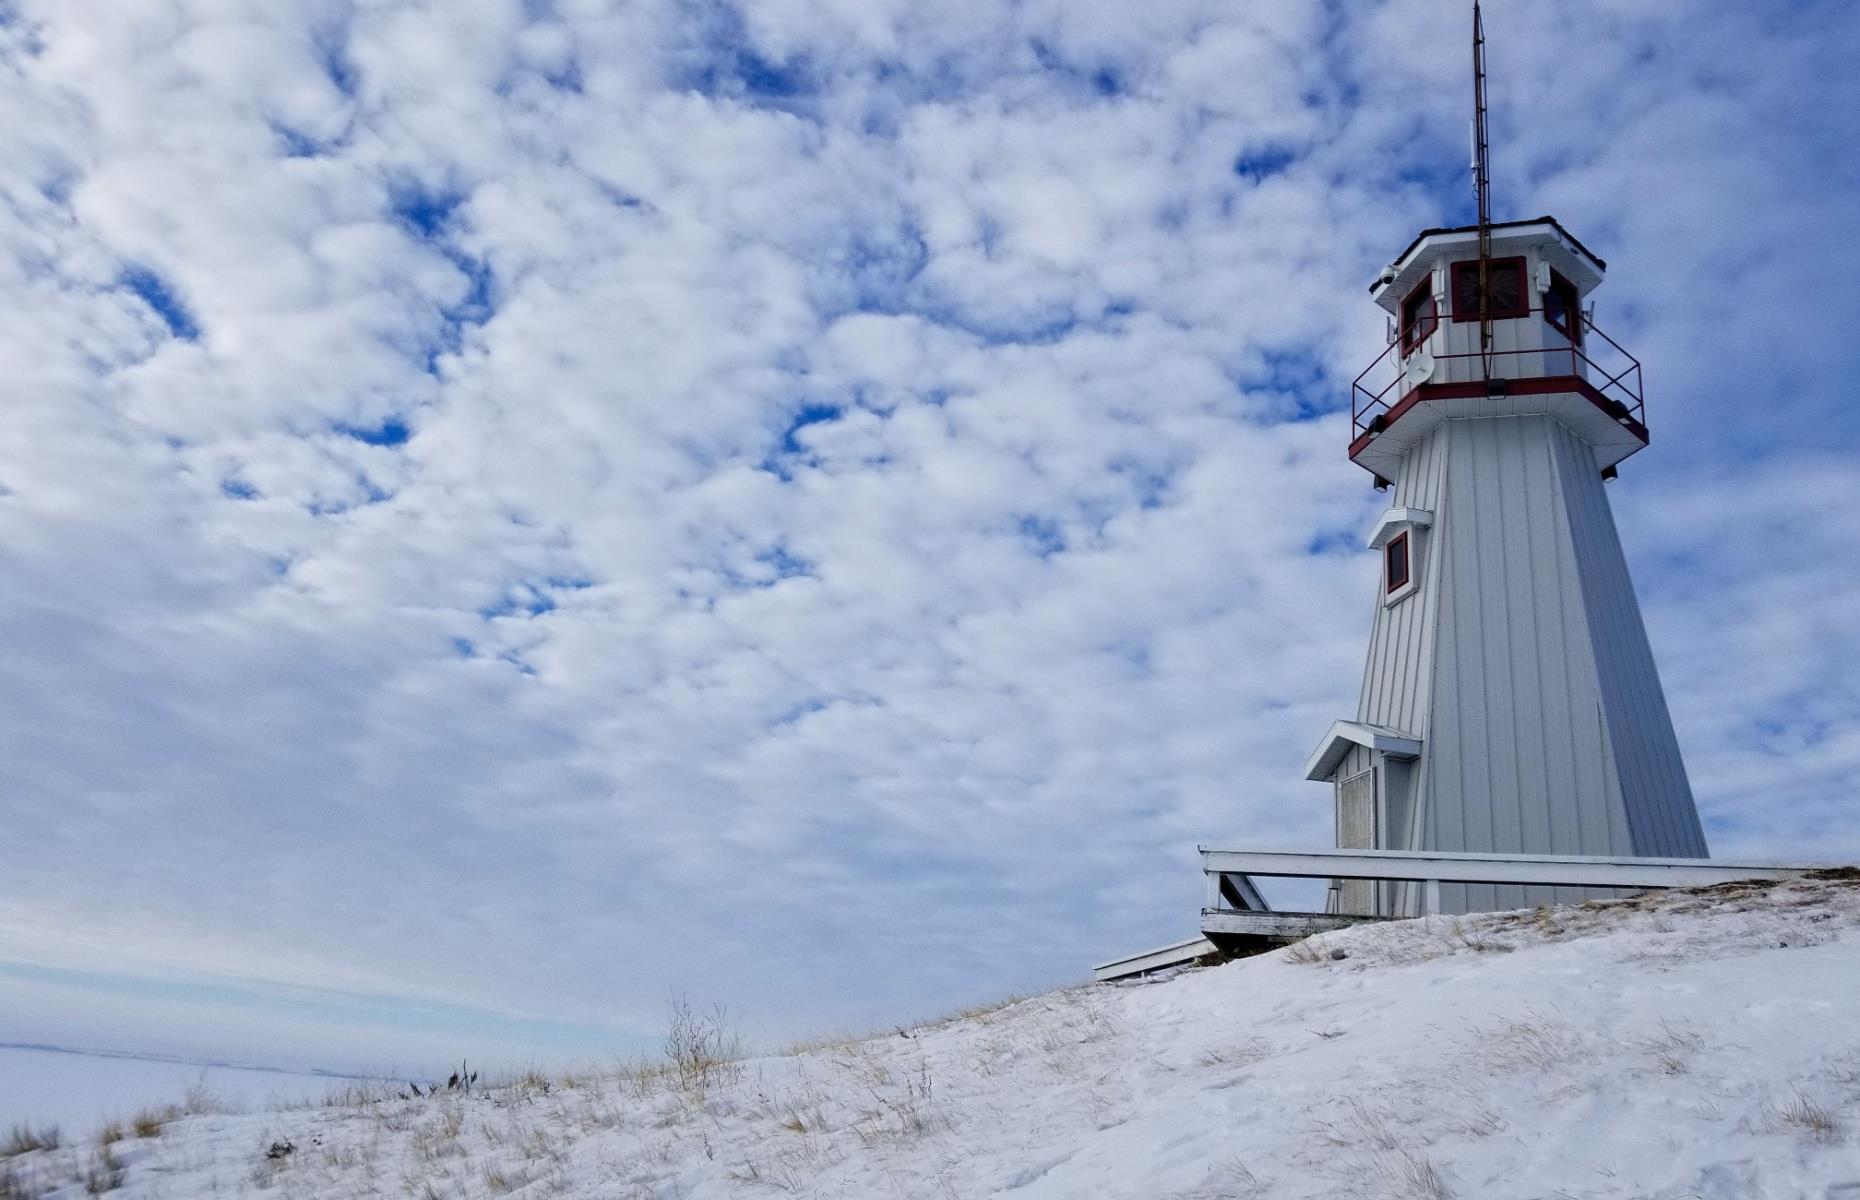 <p>For obvious reasons, Canada's lighthouses tend to be found around the coast, but this <a href="https://www.tourismsaskatchewan.com/listings/130/cochin-lighthouse">obscure beacon</a> sits in a completely land-locked province. The lighthouse, which was built in 1988, offers beautiful lakeside views from its position on Pirot Hill at 1,867 feet (569m) above sea level, overlooking Jackfish and Murray Lakes. The site is near the town of Cochin, a resort village in the western part of the province.</p>  <p><strong><a href="https://www.loveexploring.com/galleries/87044/americas-most-beautiful-lighthouses-you-can-visit?page=1">These are the most beautiful lighthouses in the USA</a></strong></p>